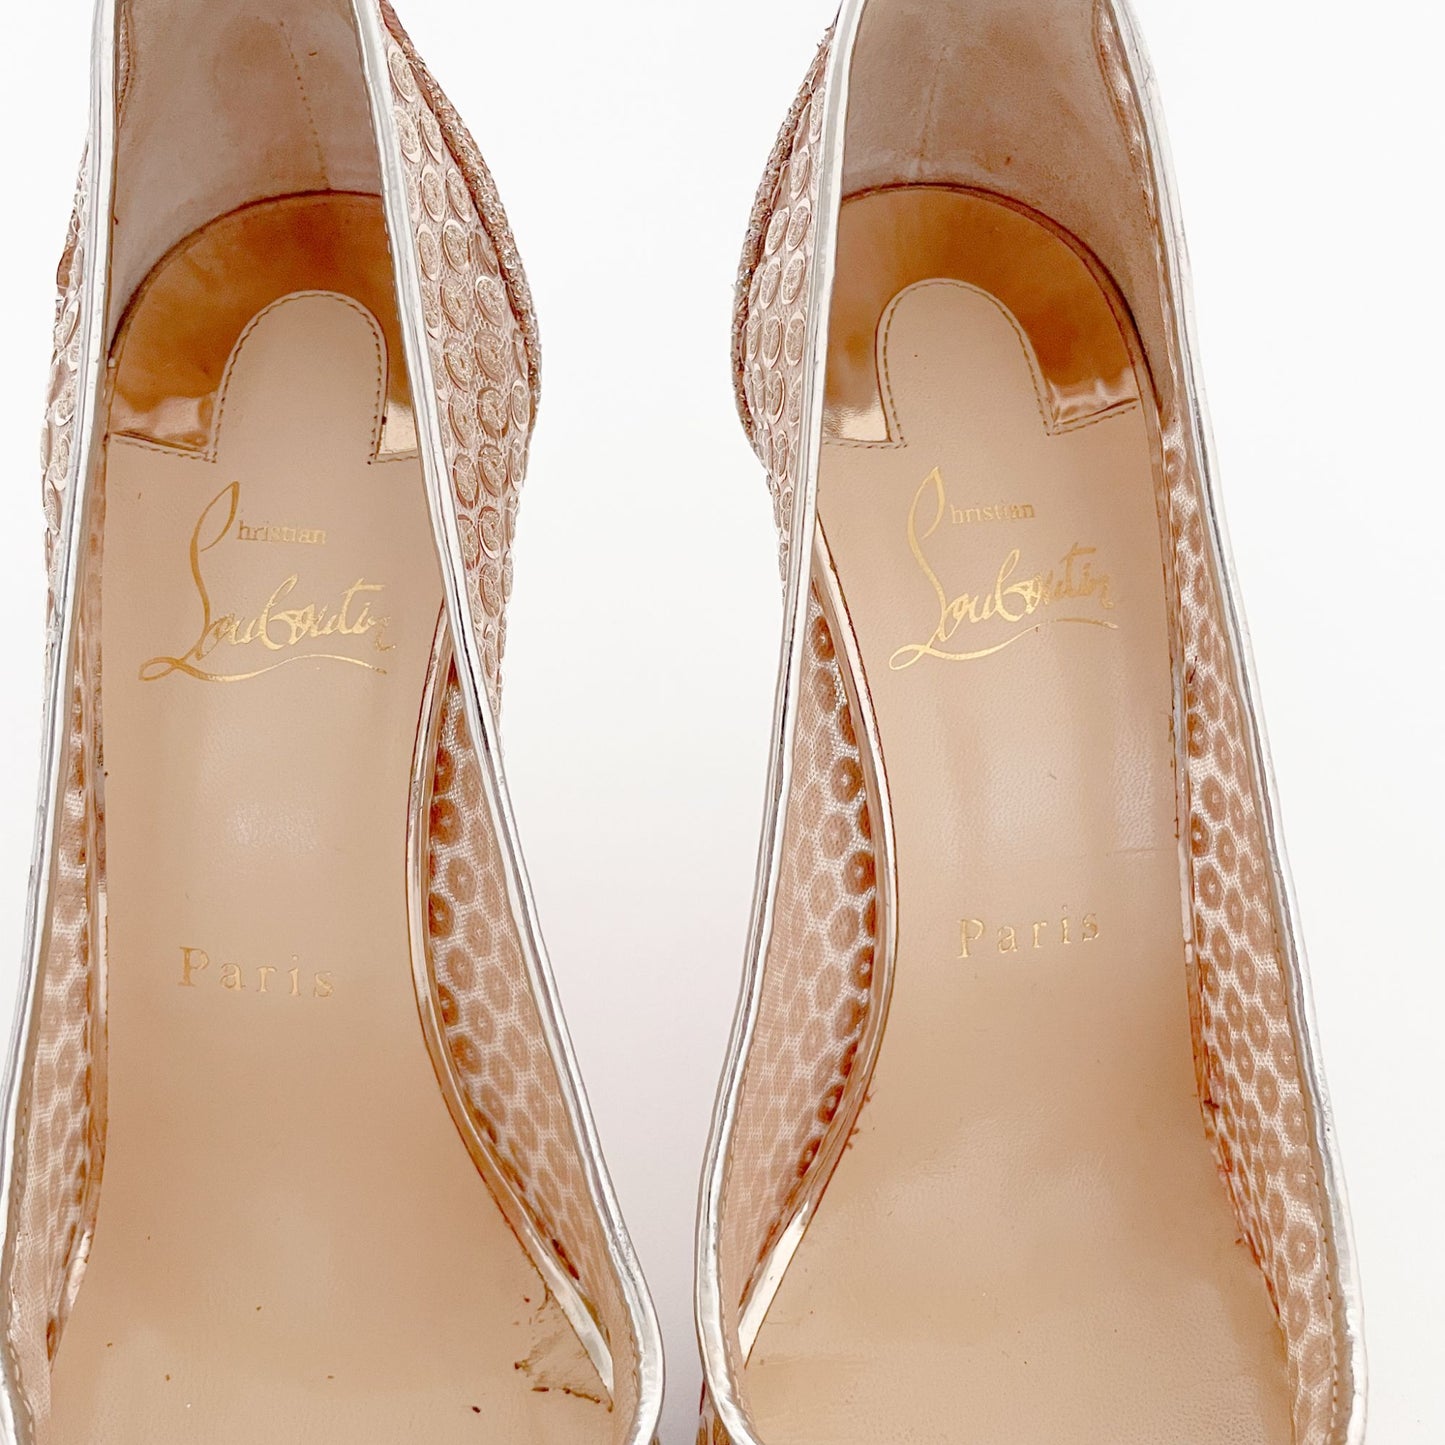 Christian Louboutin Lace 554 100 Pumps in Version Nude Rete Sequin Size 39